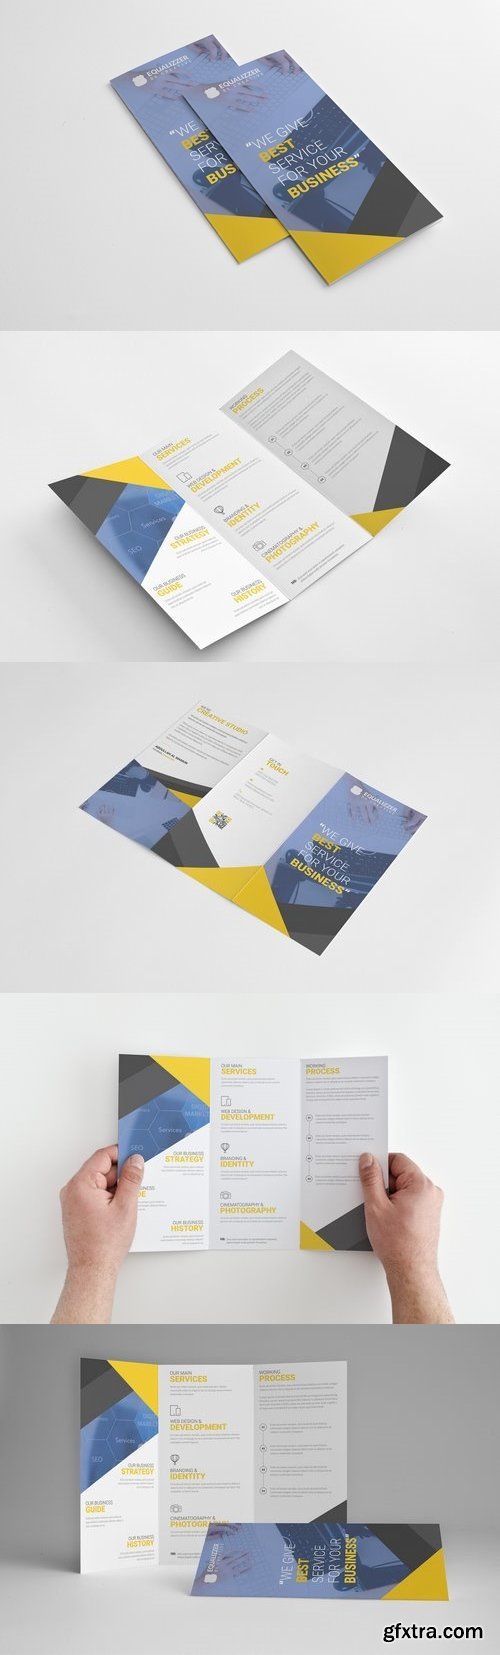 CM - wee Corporate trifold brochure 1775576